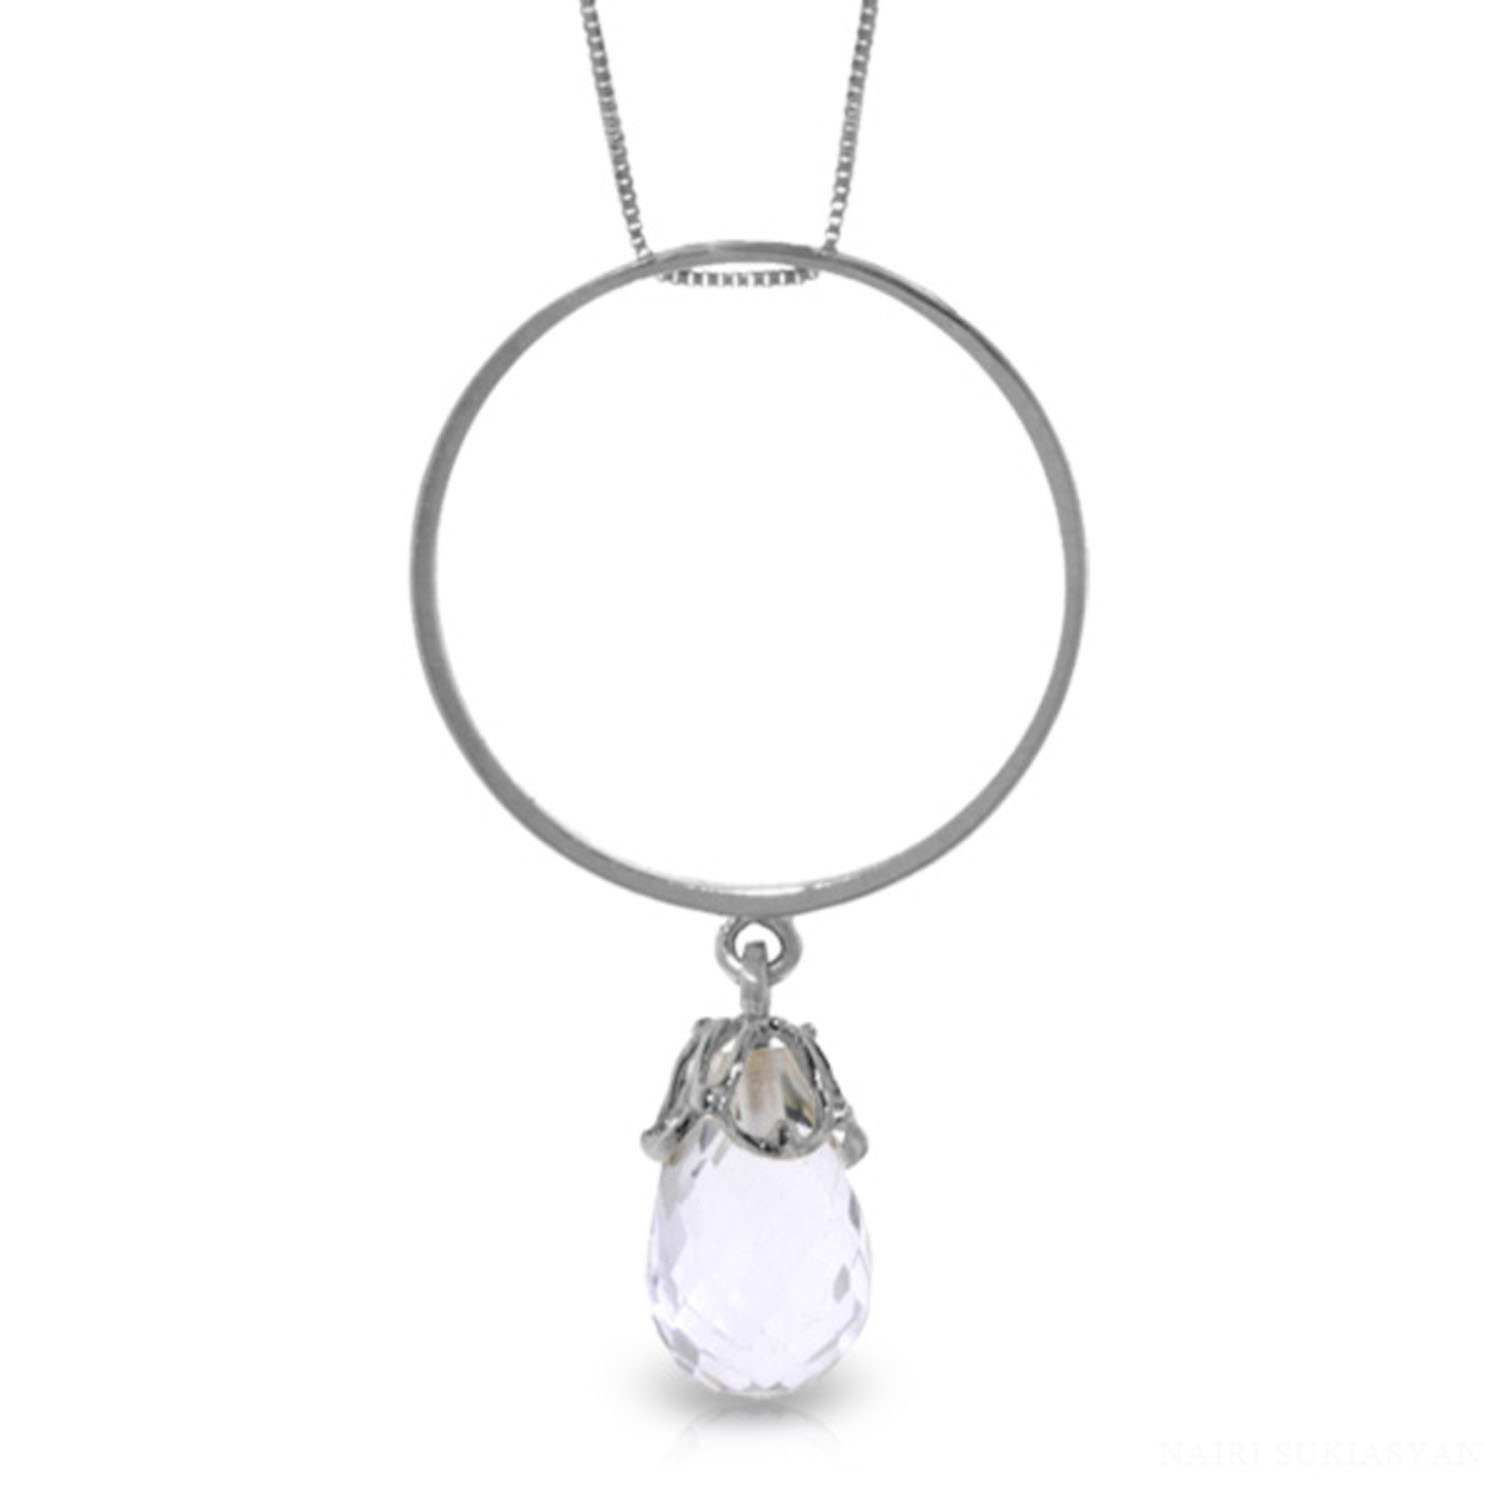 Galaxy Gold 3 Carat 14k 18" Solid White Gold Necklace with Natural White Topaz Charm Circle Pendant - image 1 of 2